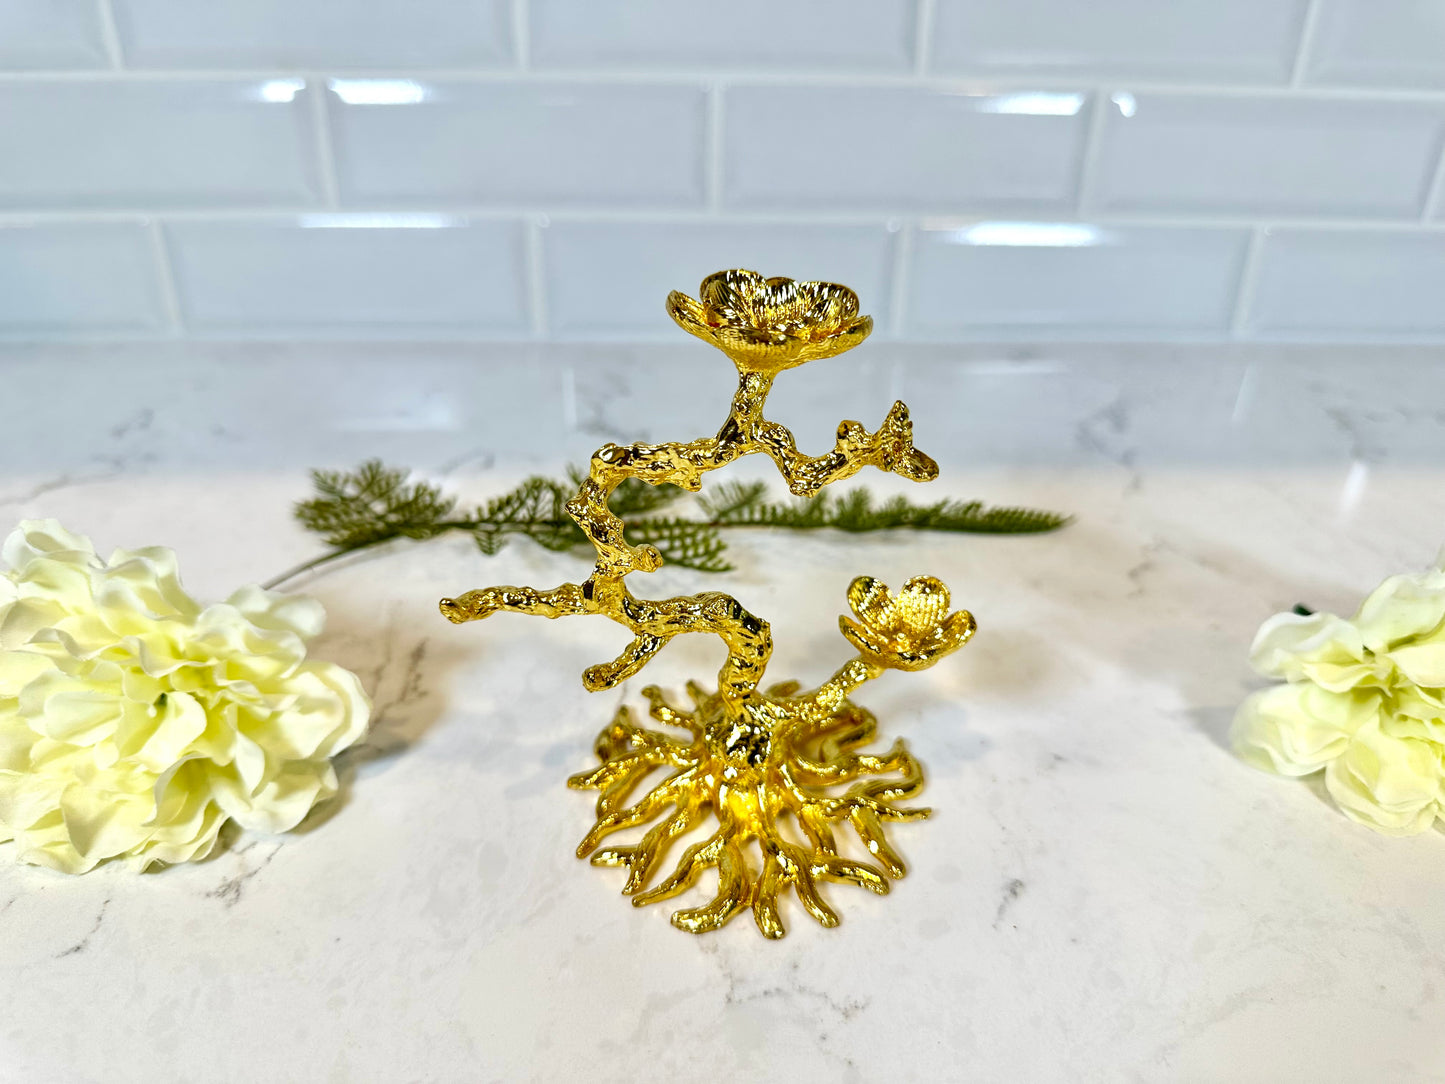 Gold Metal Tree Double Kugle Holder